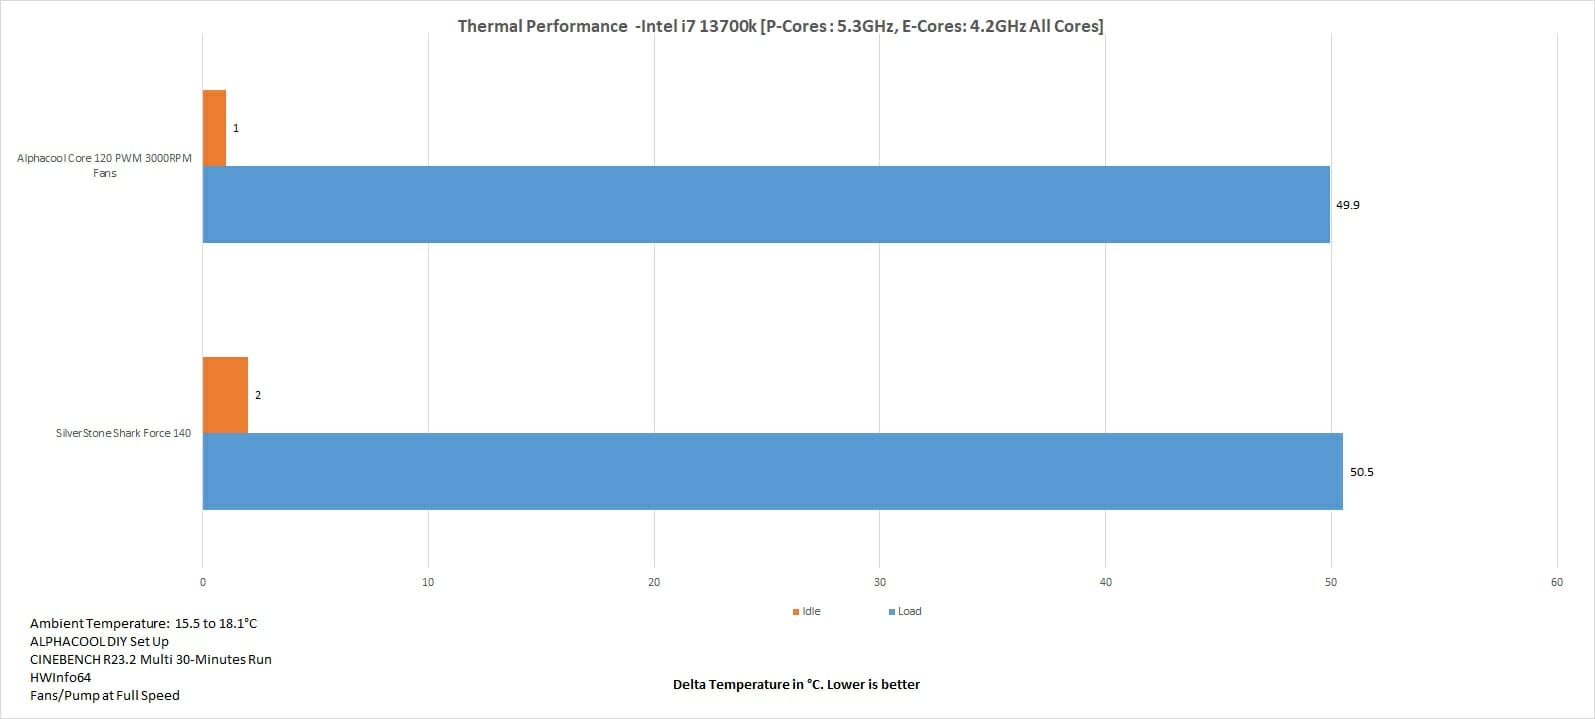 Thermal Performance 4